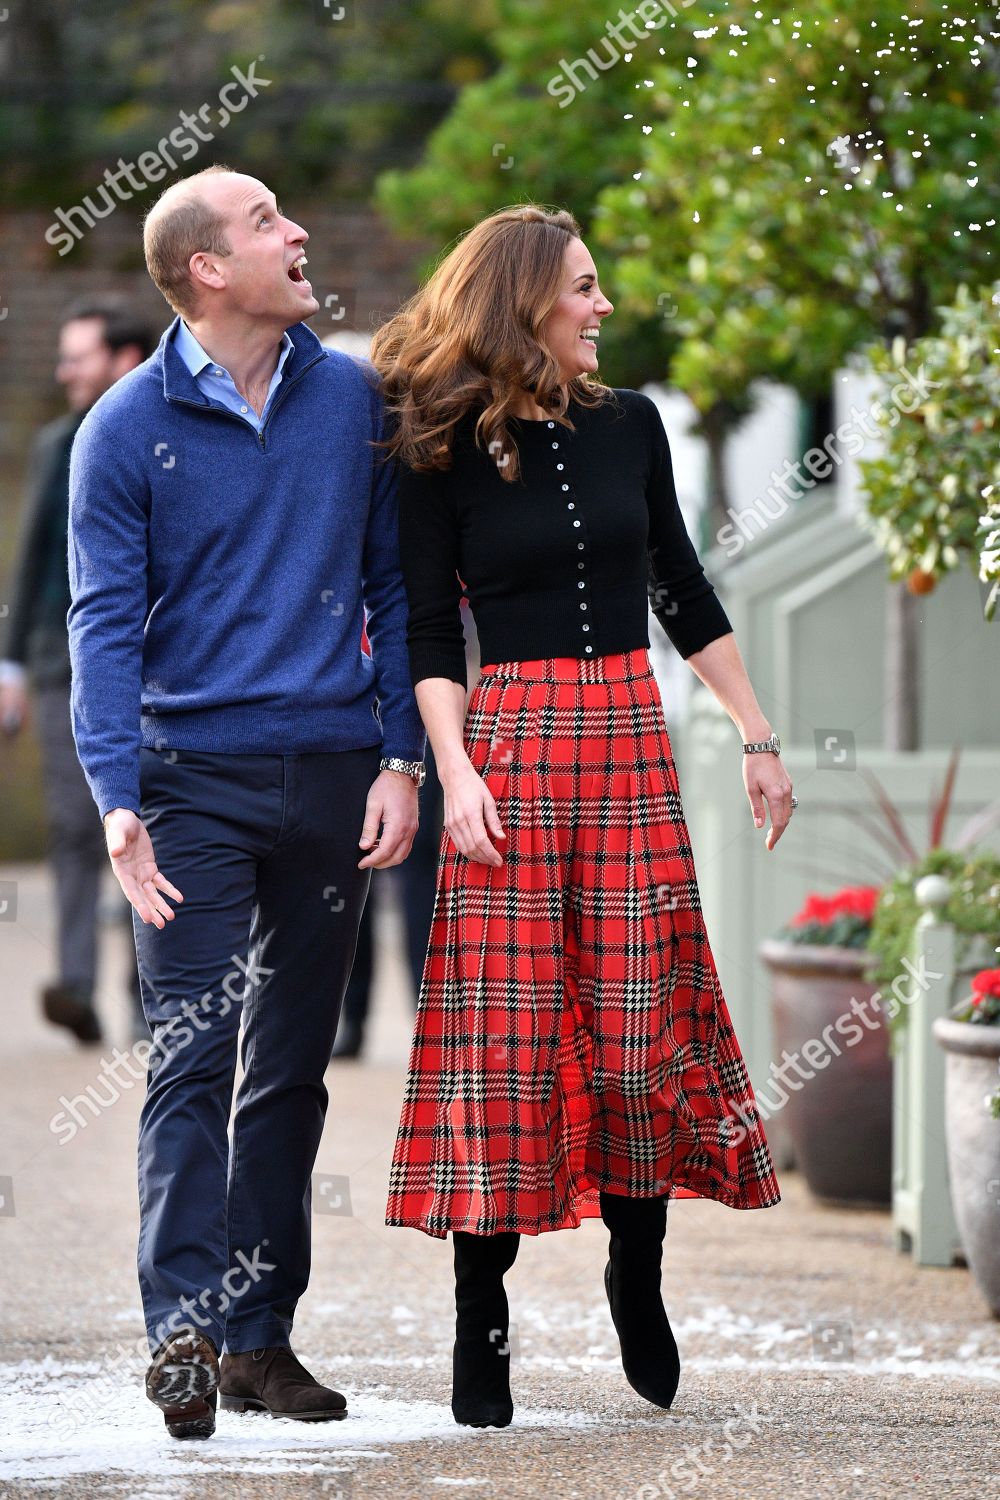 prince-william-and-catherine-duchess-of-cambridge-host-lunch-for-military-personnel-london-uk-shutterstock-editorial-10013427s.jpg